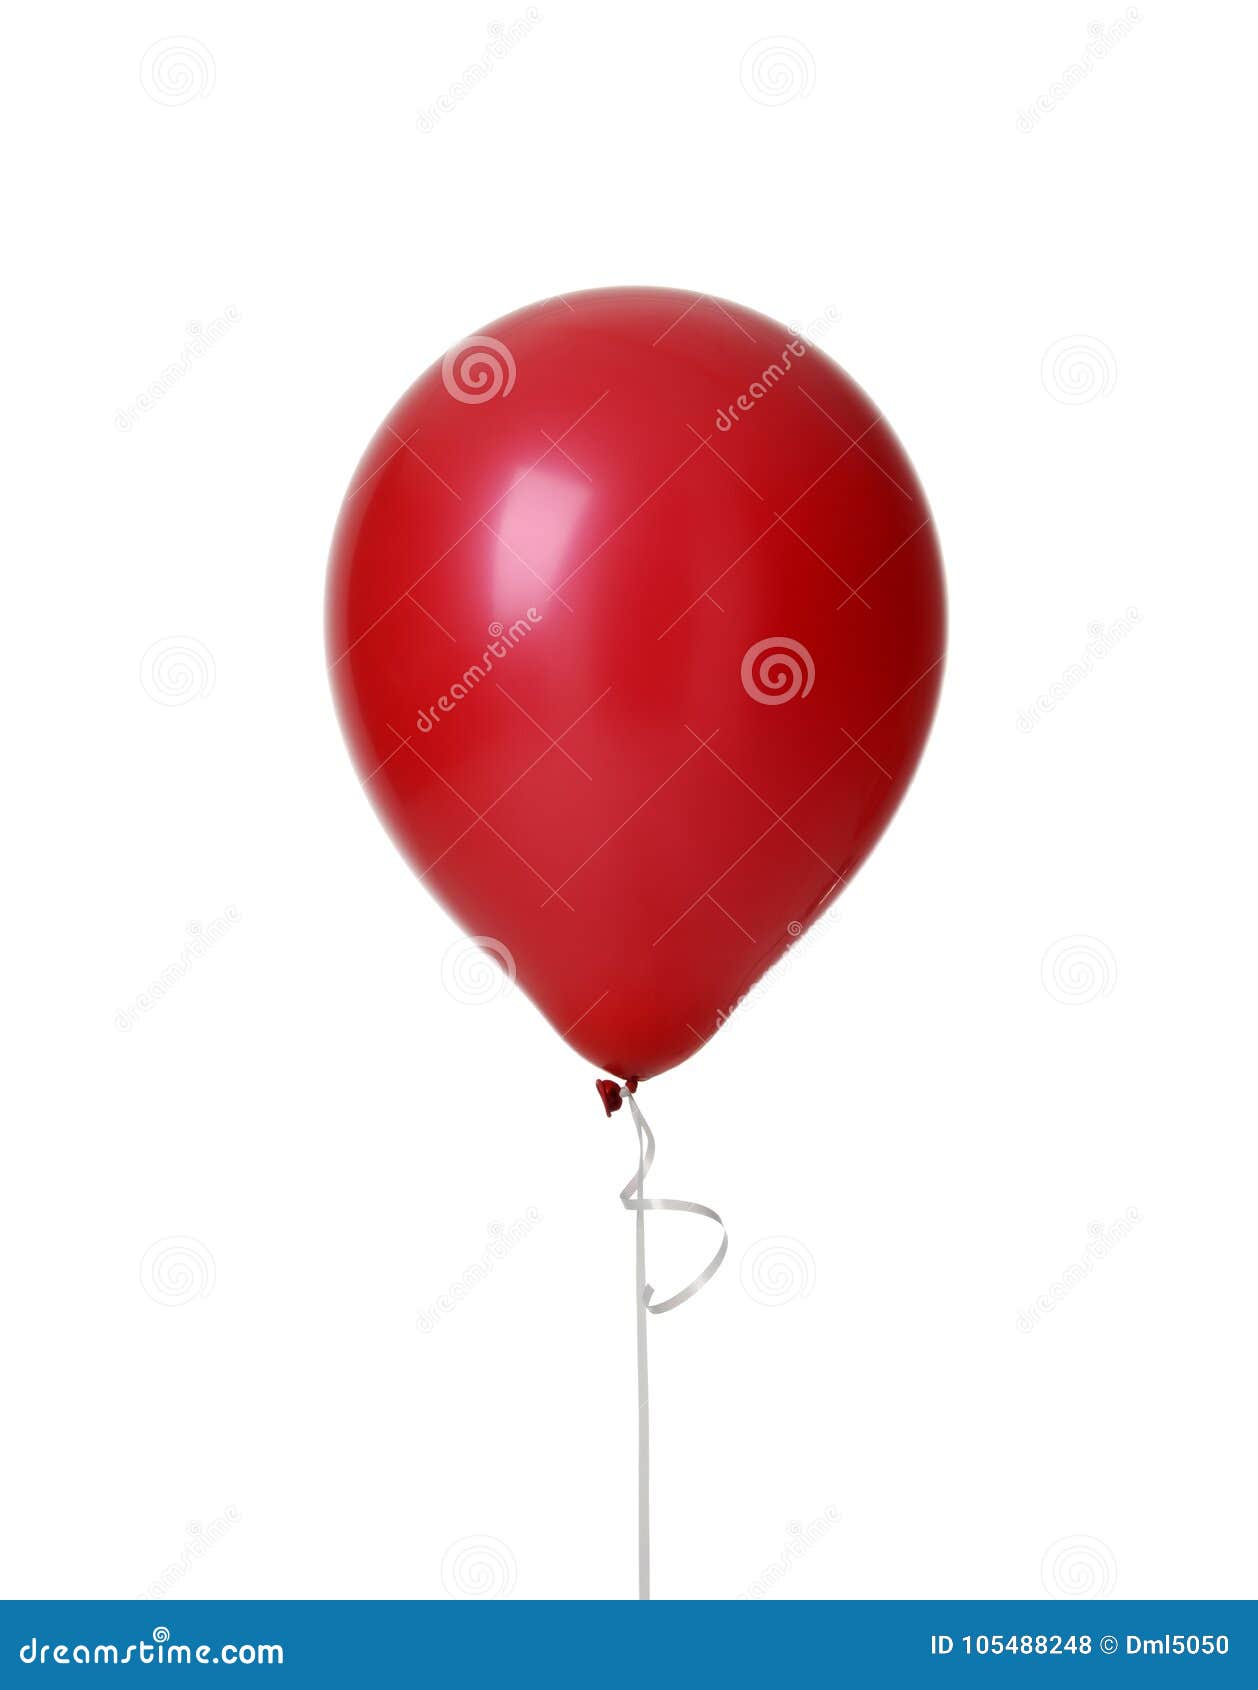 image of single big red latex balloon for birthday party